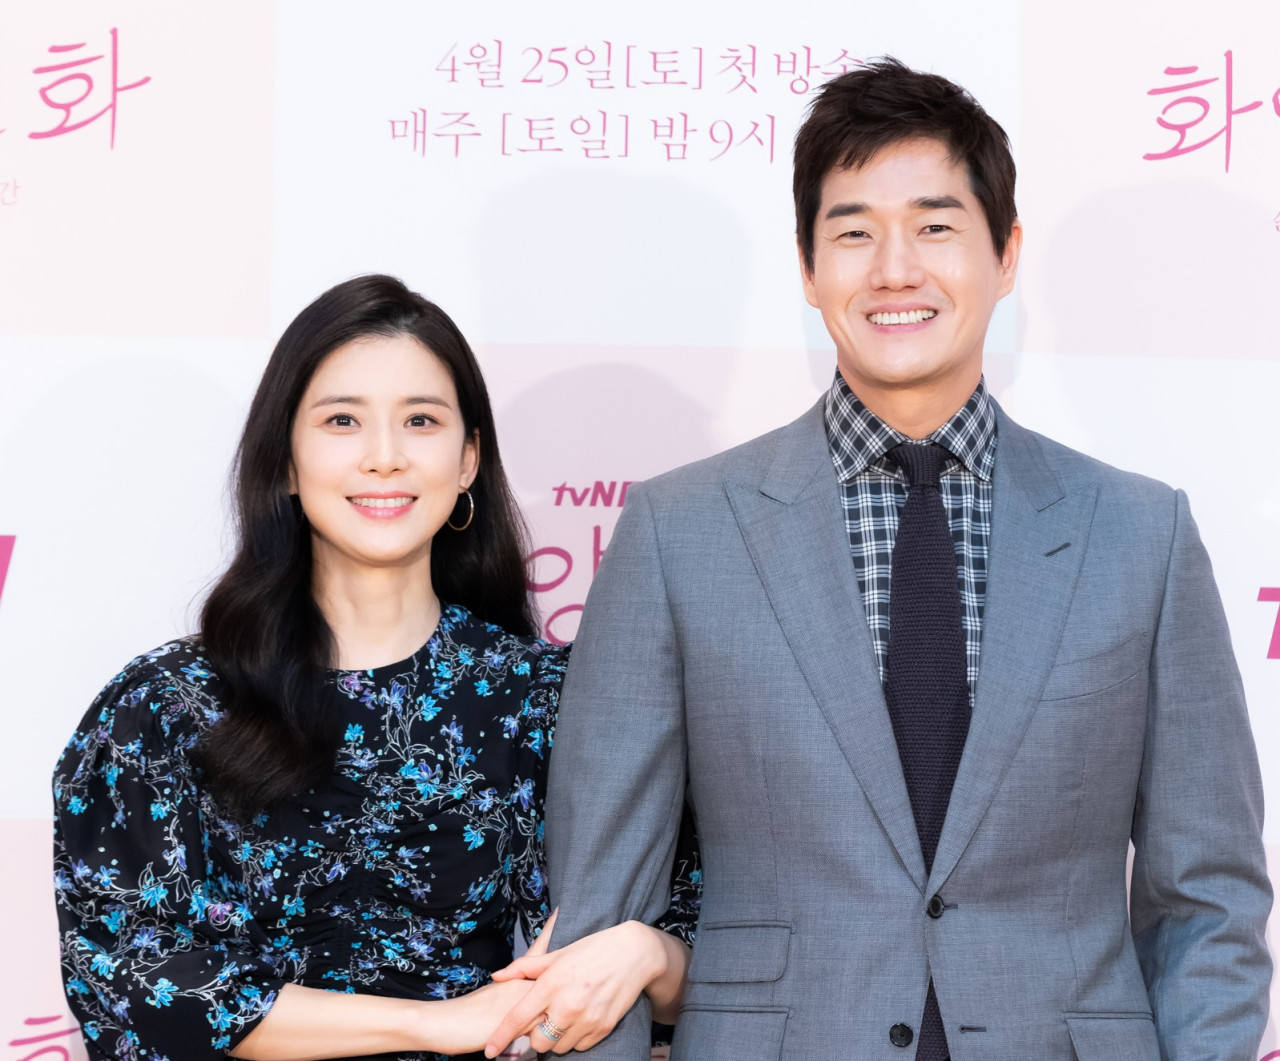 Lee Bo-young (left) and Yoo Ji-tae pose for photos at a “When My Love Blooms” press conference held Friday. (tvN)